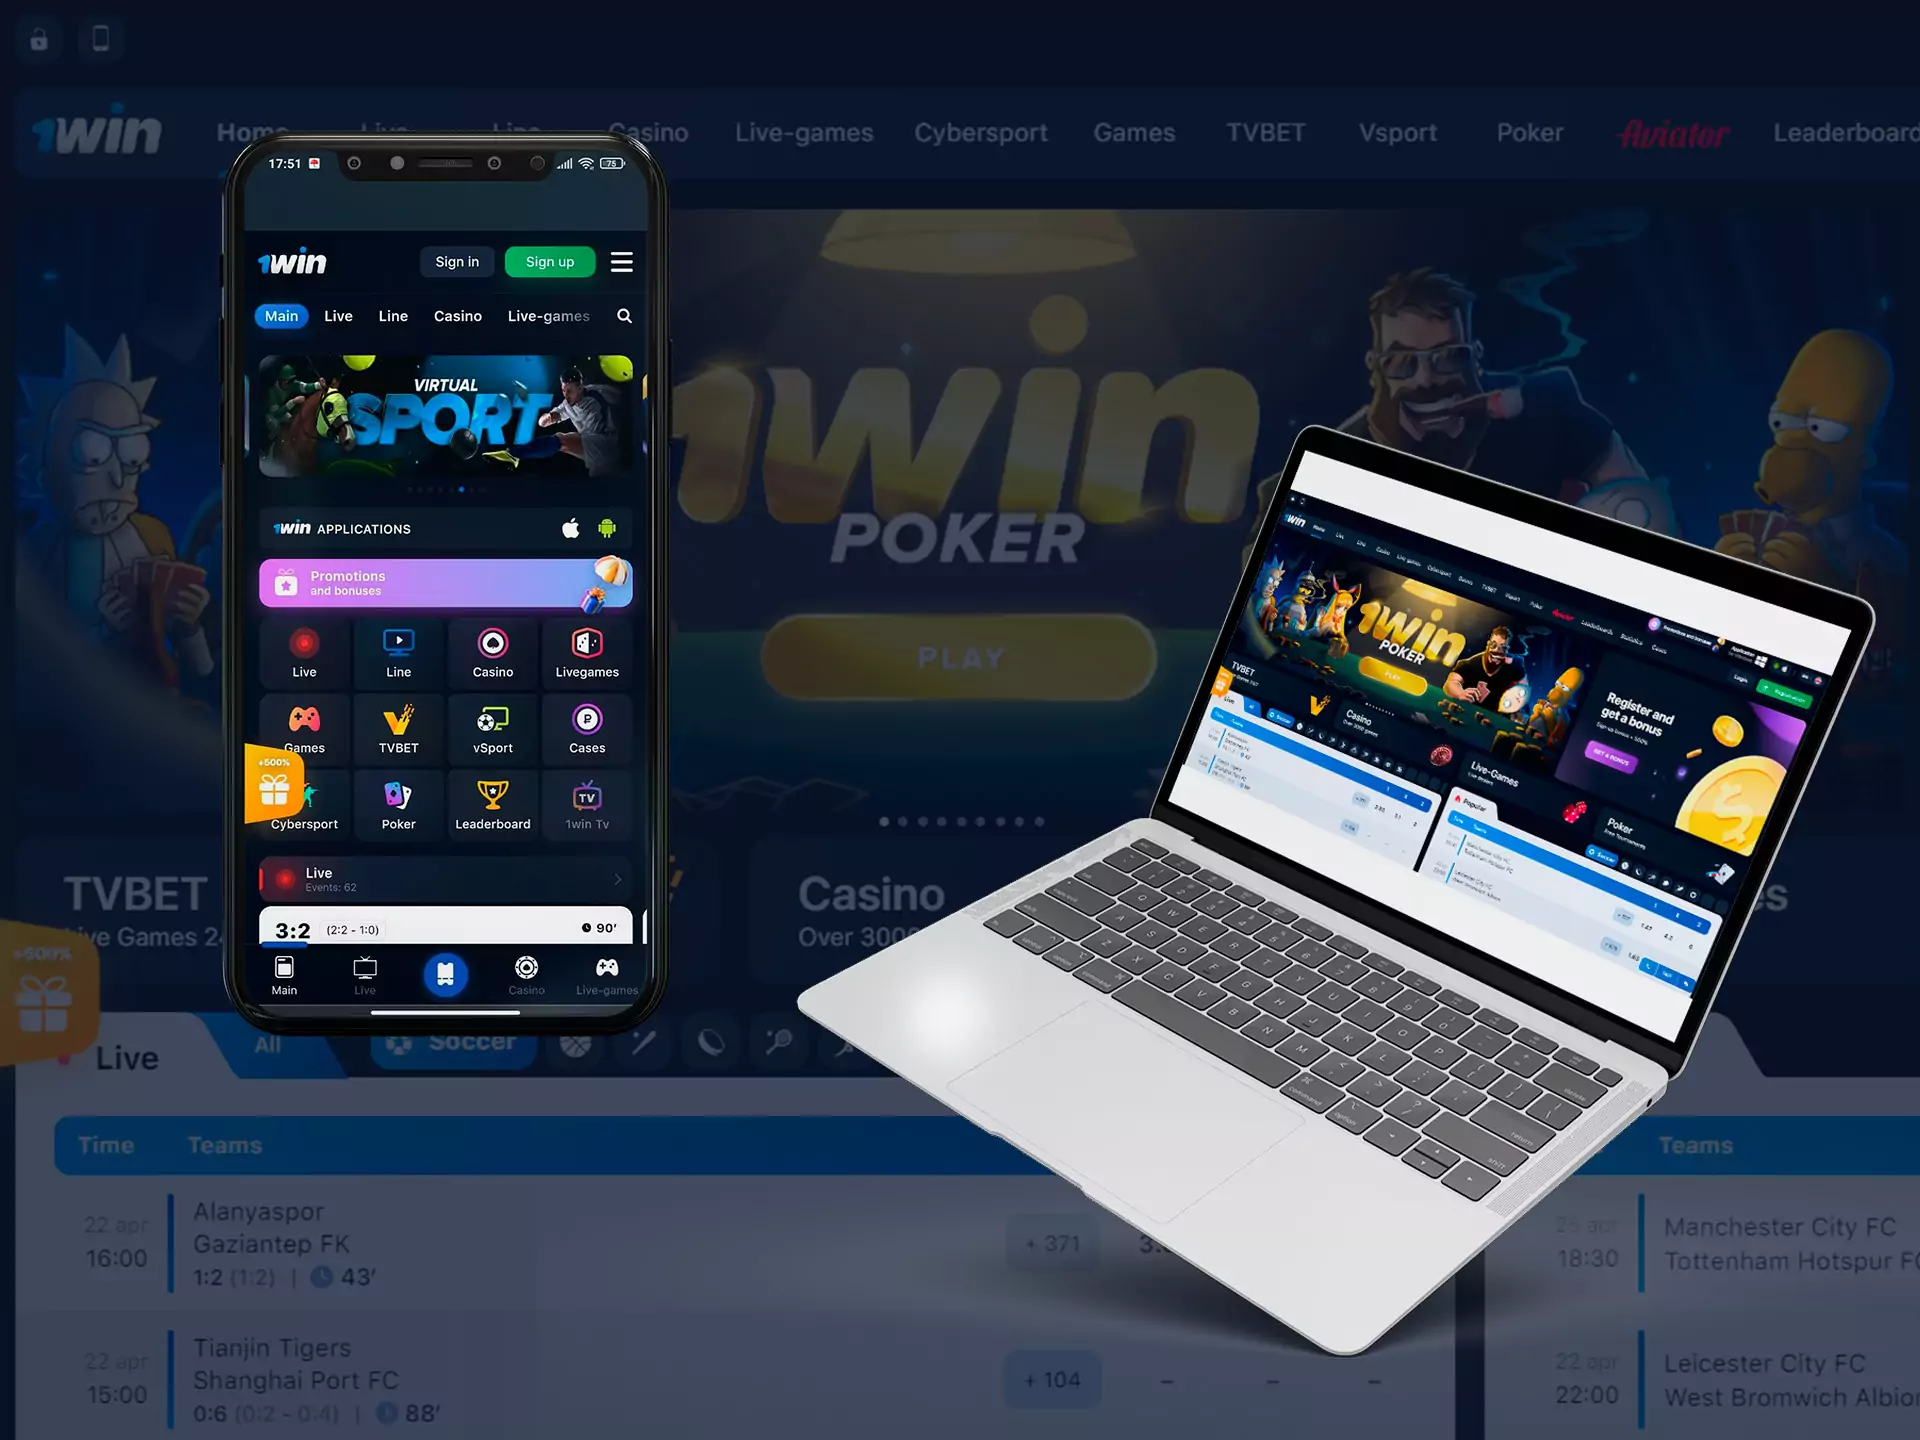 You can bet on the site, in the PC client, and application for a smartphone.